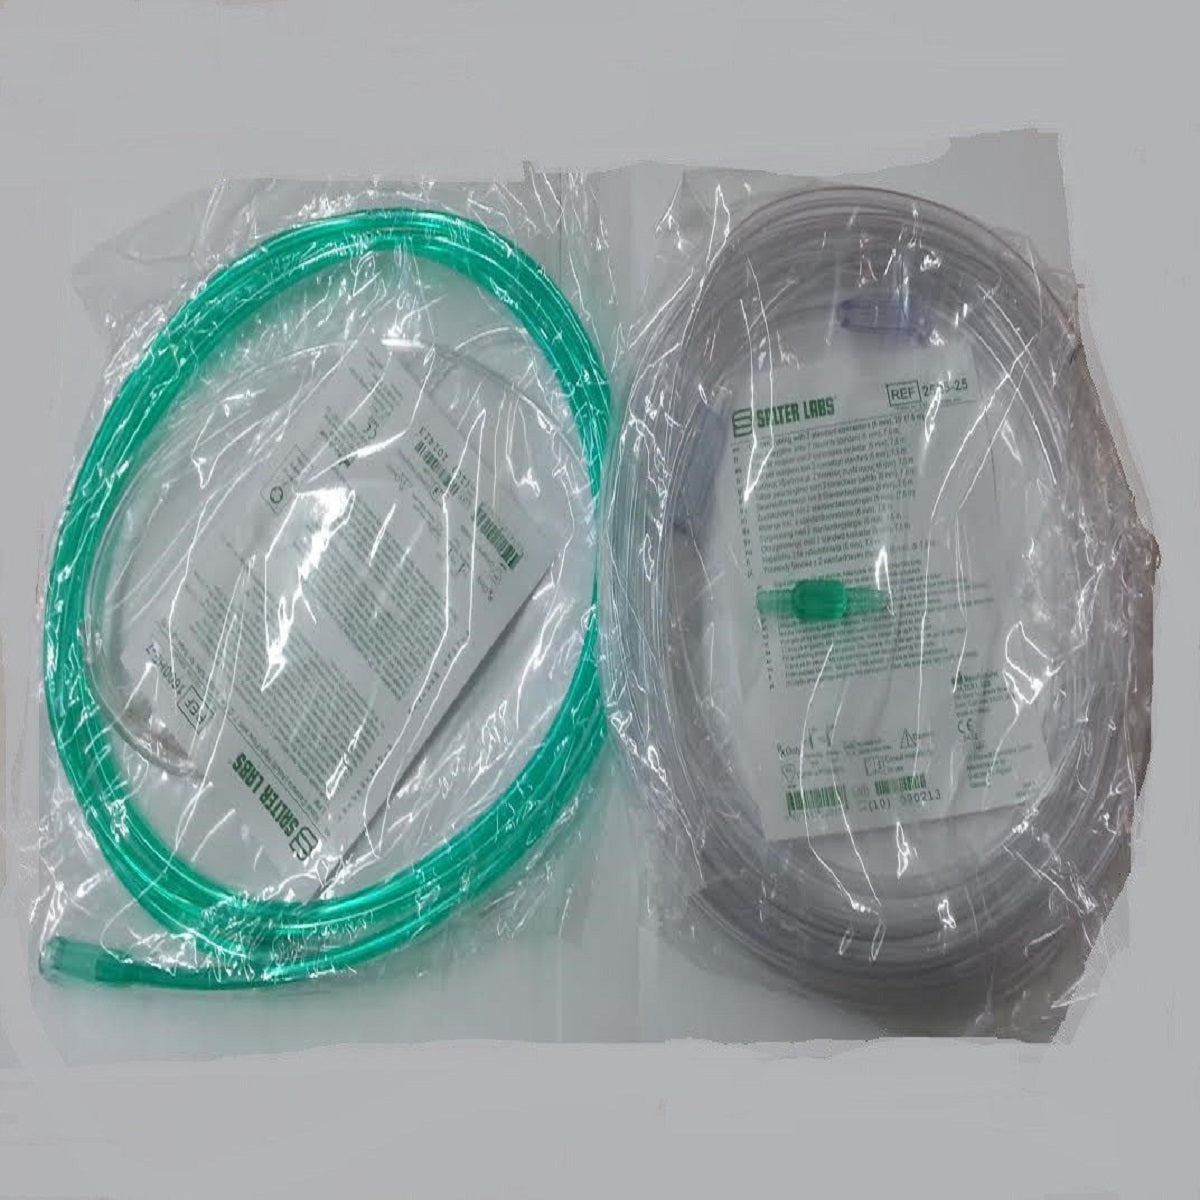 Oxygen Tubing Starter Pack. 25' Hose, 7' Cannula and Connector!